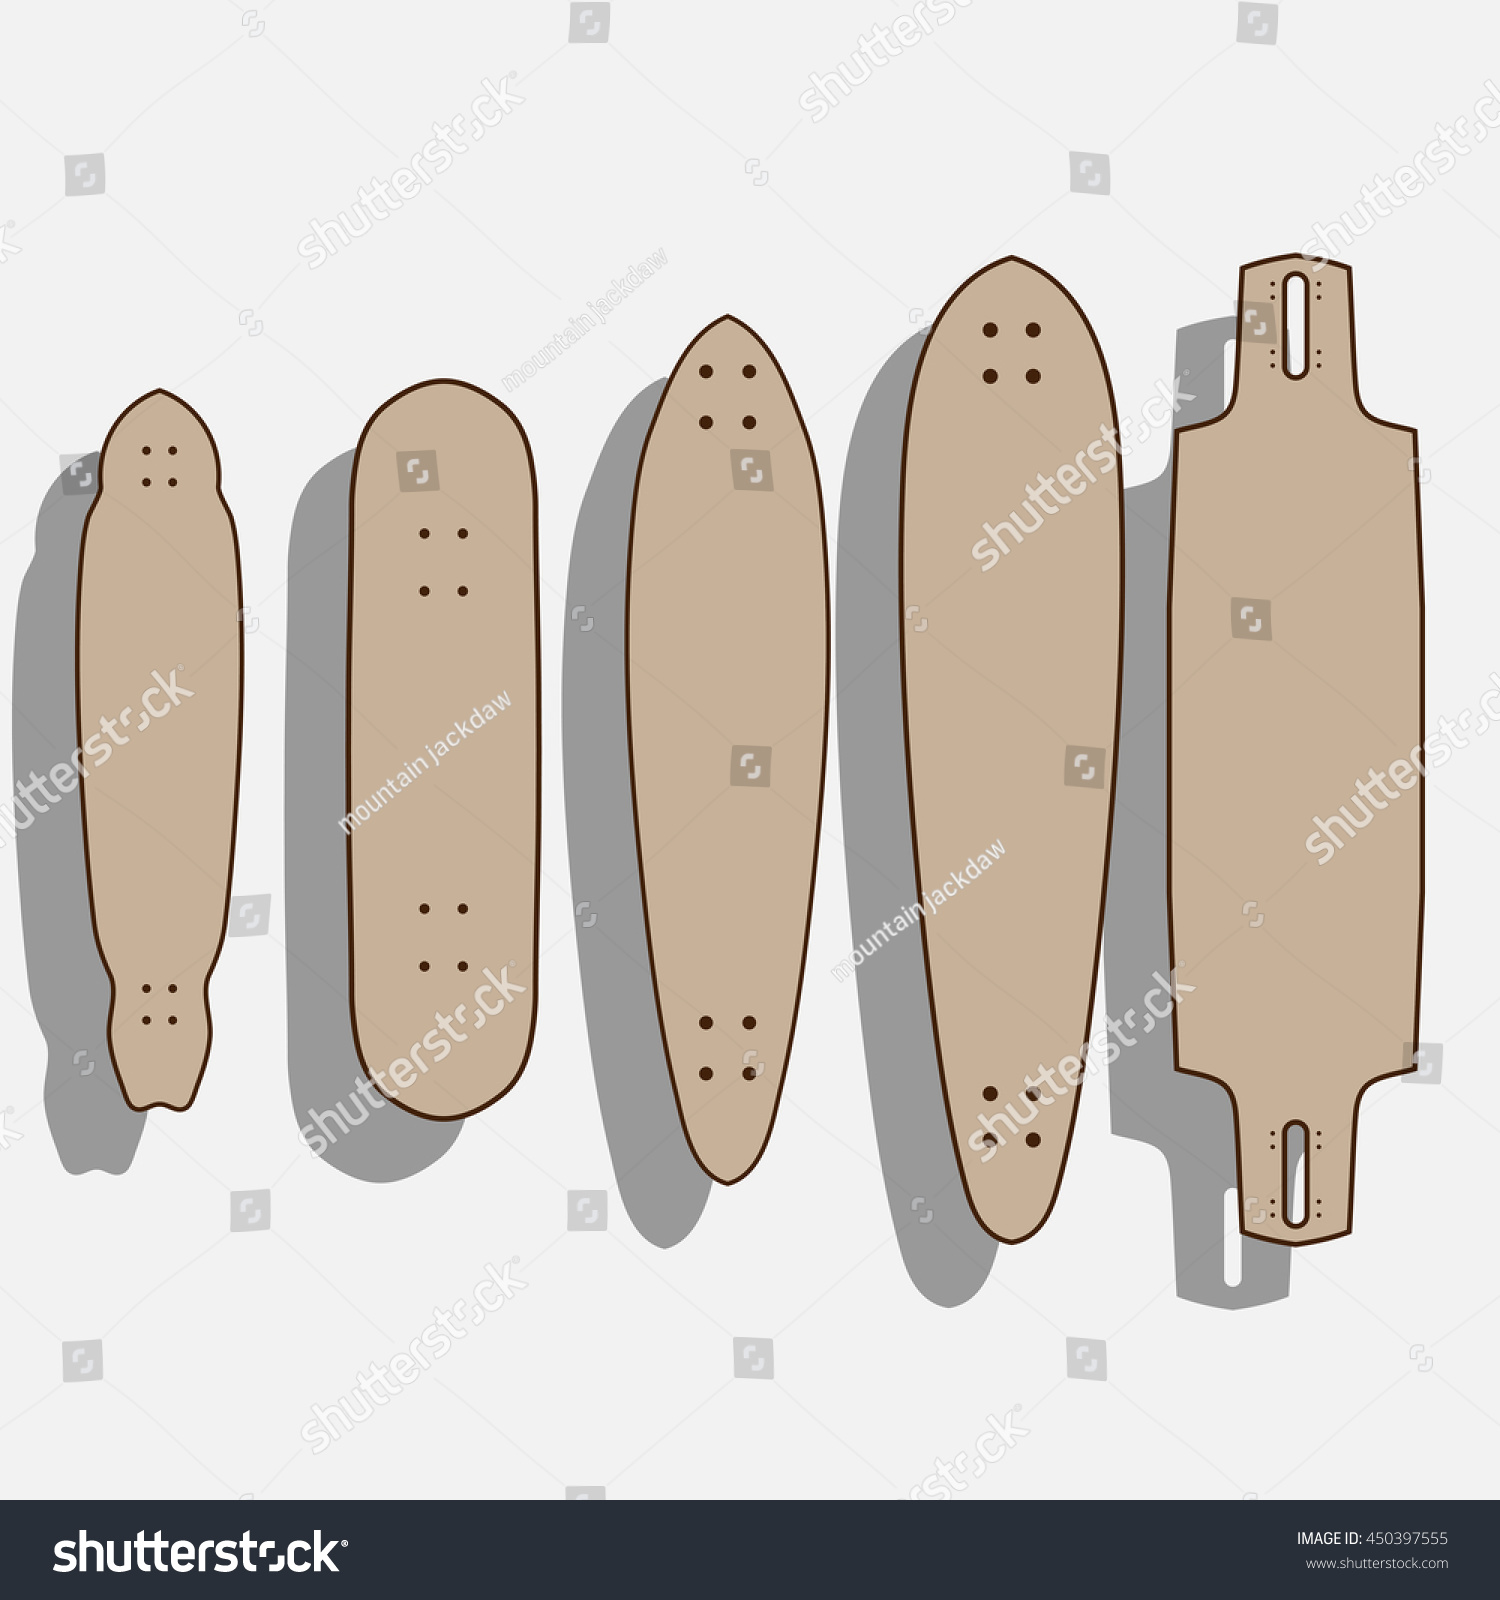 stock vector blank longboard template different forms of longboards and skateboards vector illustration 450397555